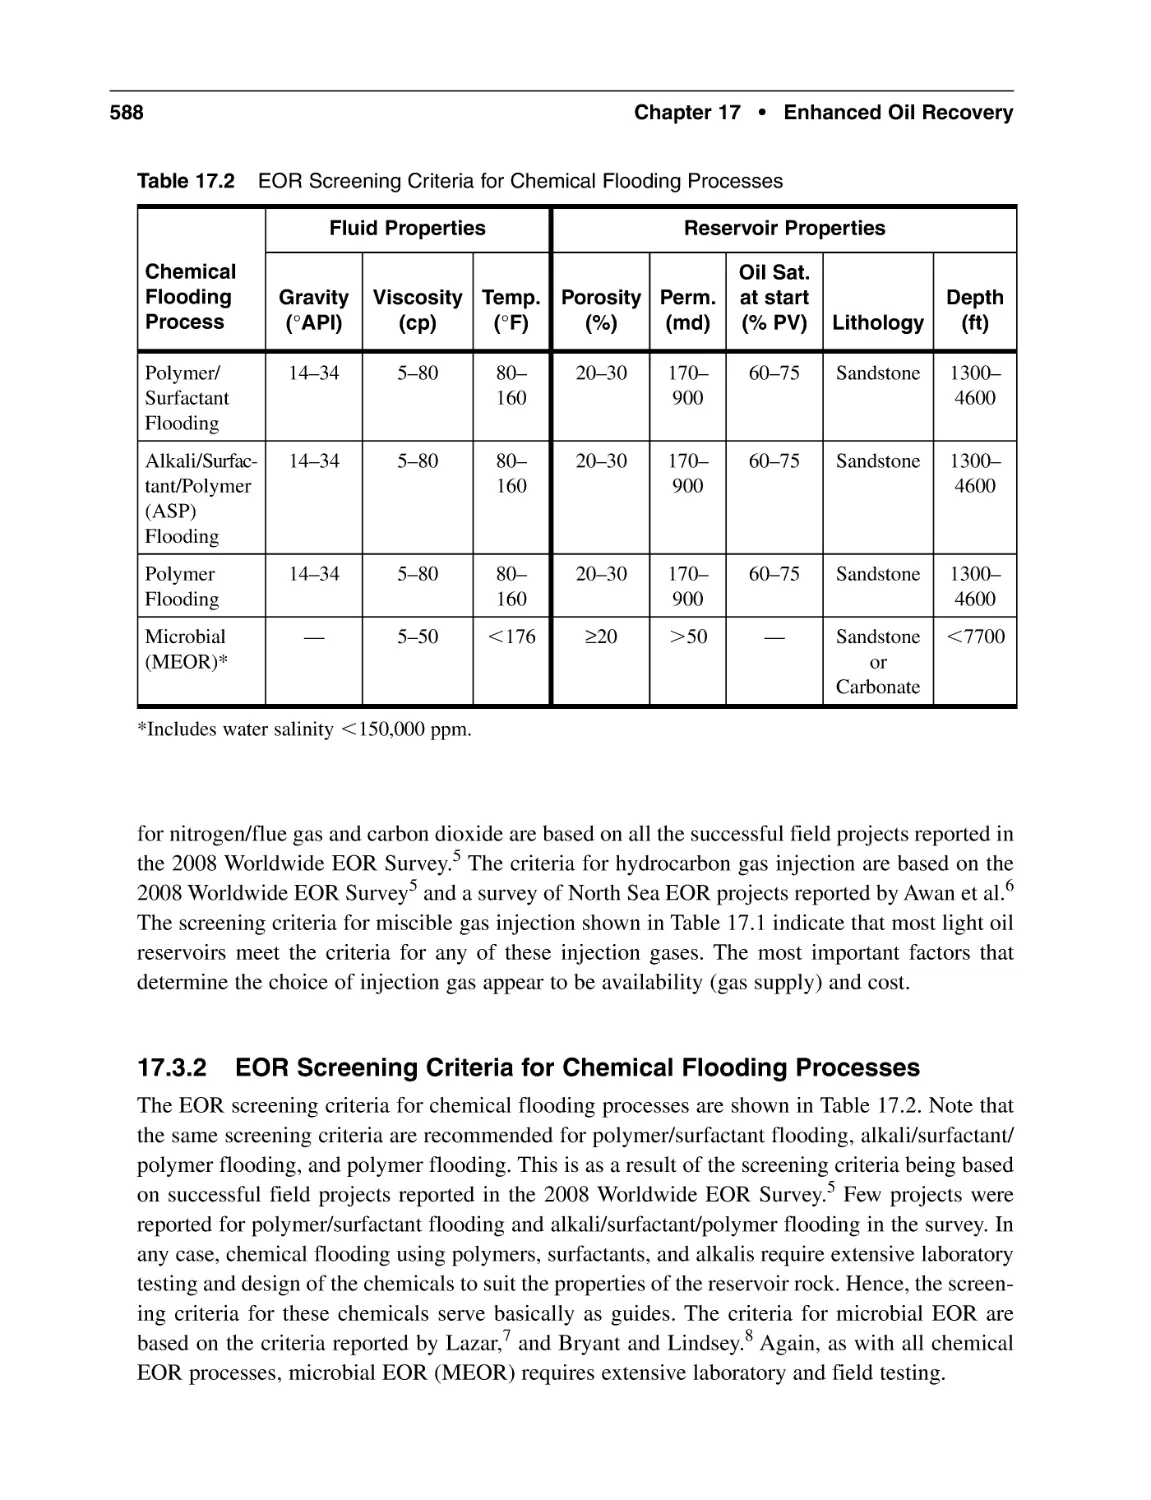 17.3.2 EOR Screening Criteria for Chemical Flooding Processes